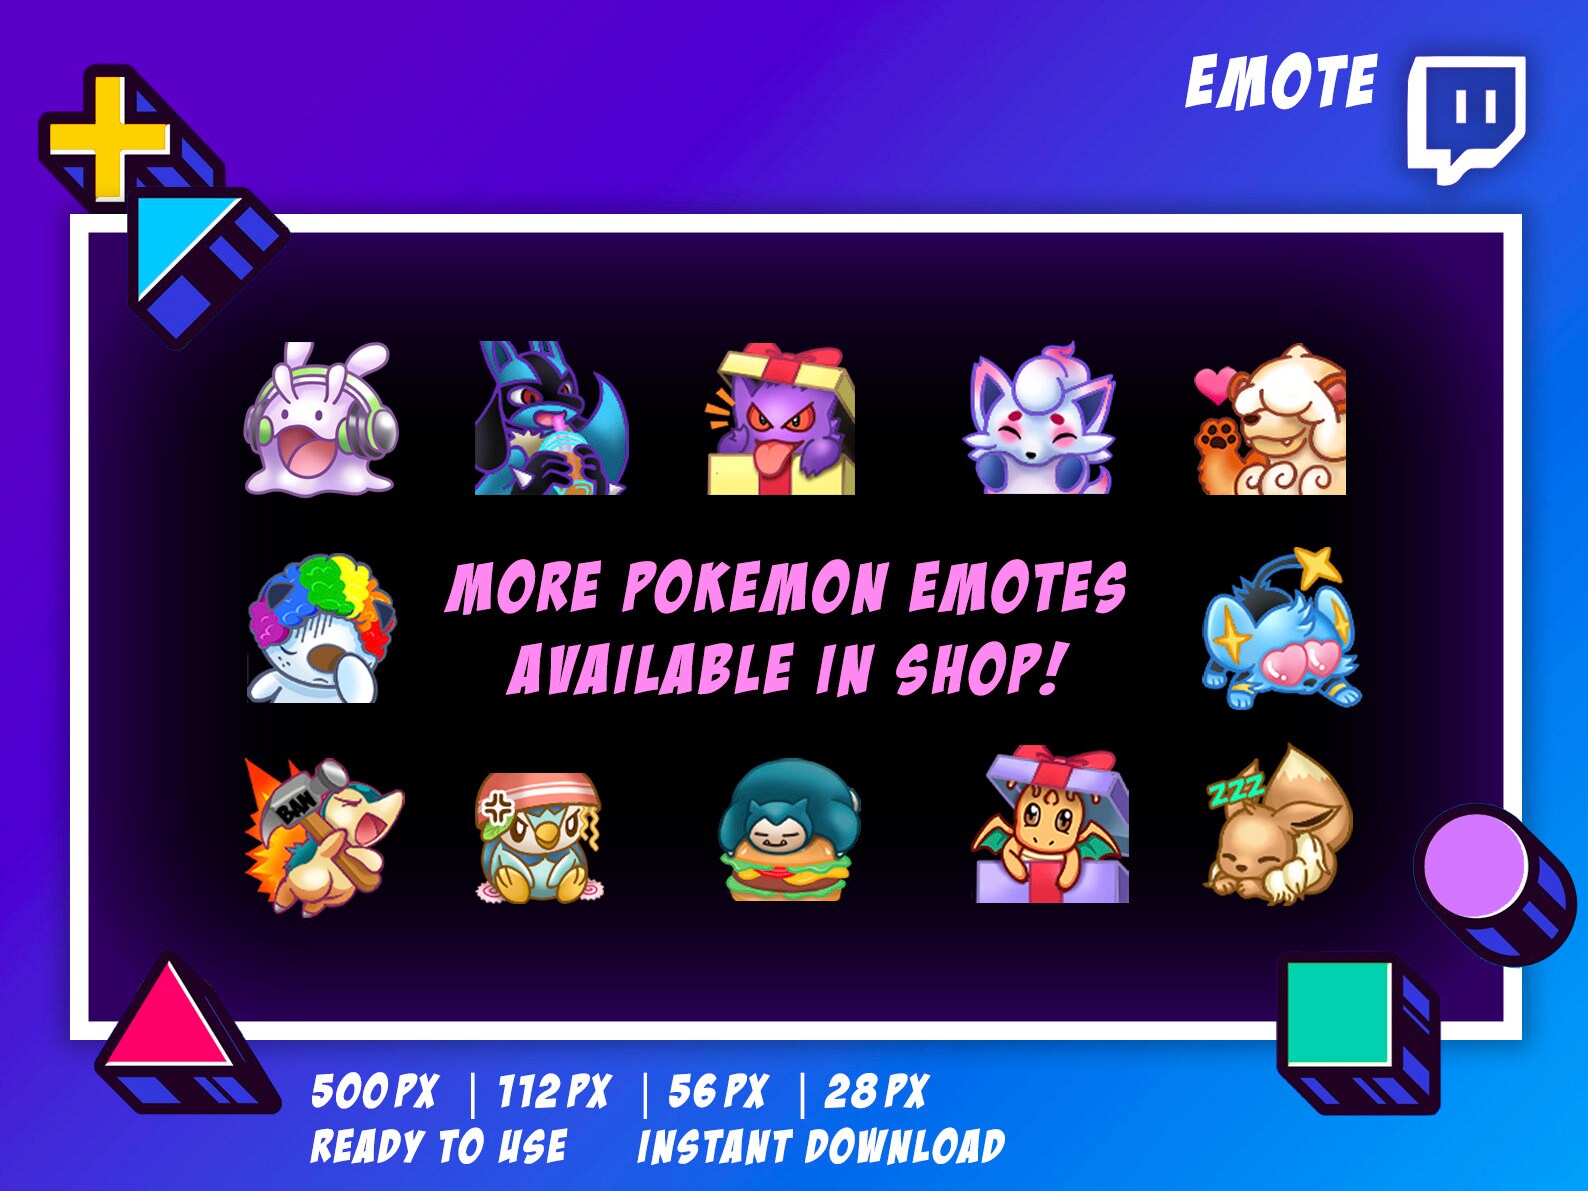 Poki and Fishin' Emotes that were recently unencrypted. (via